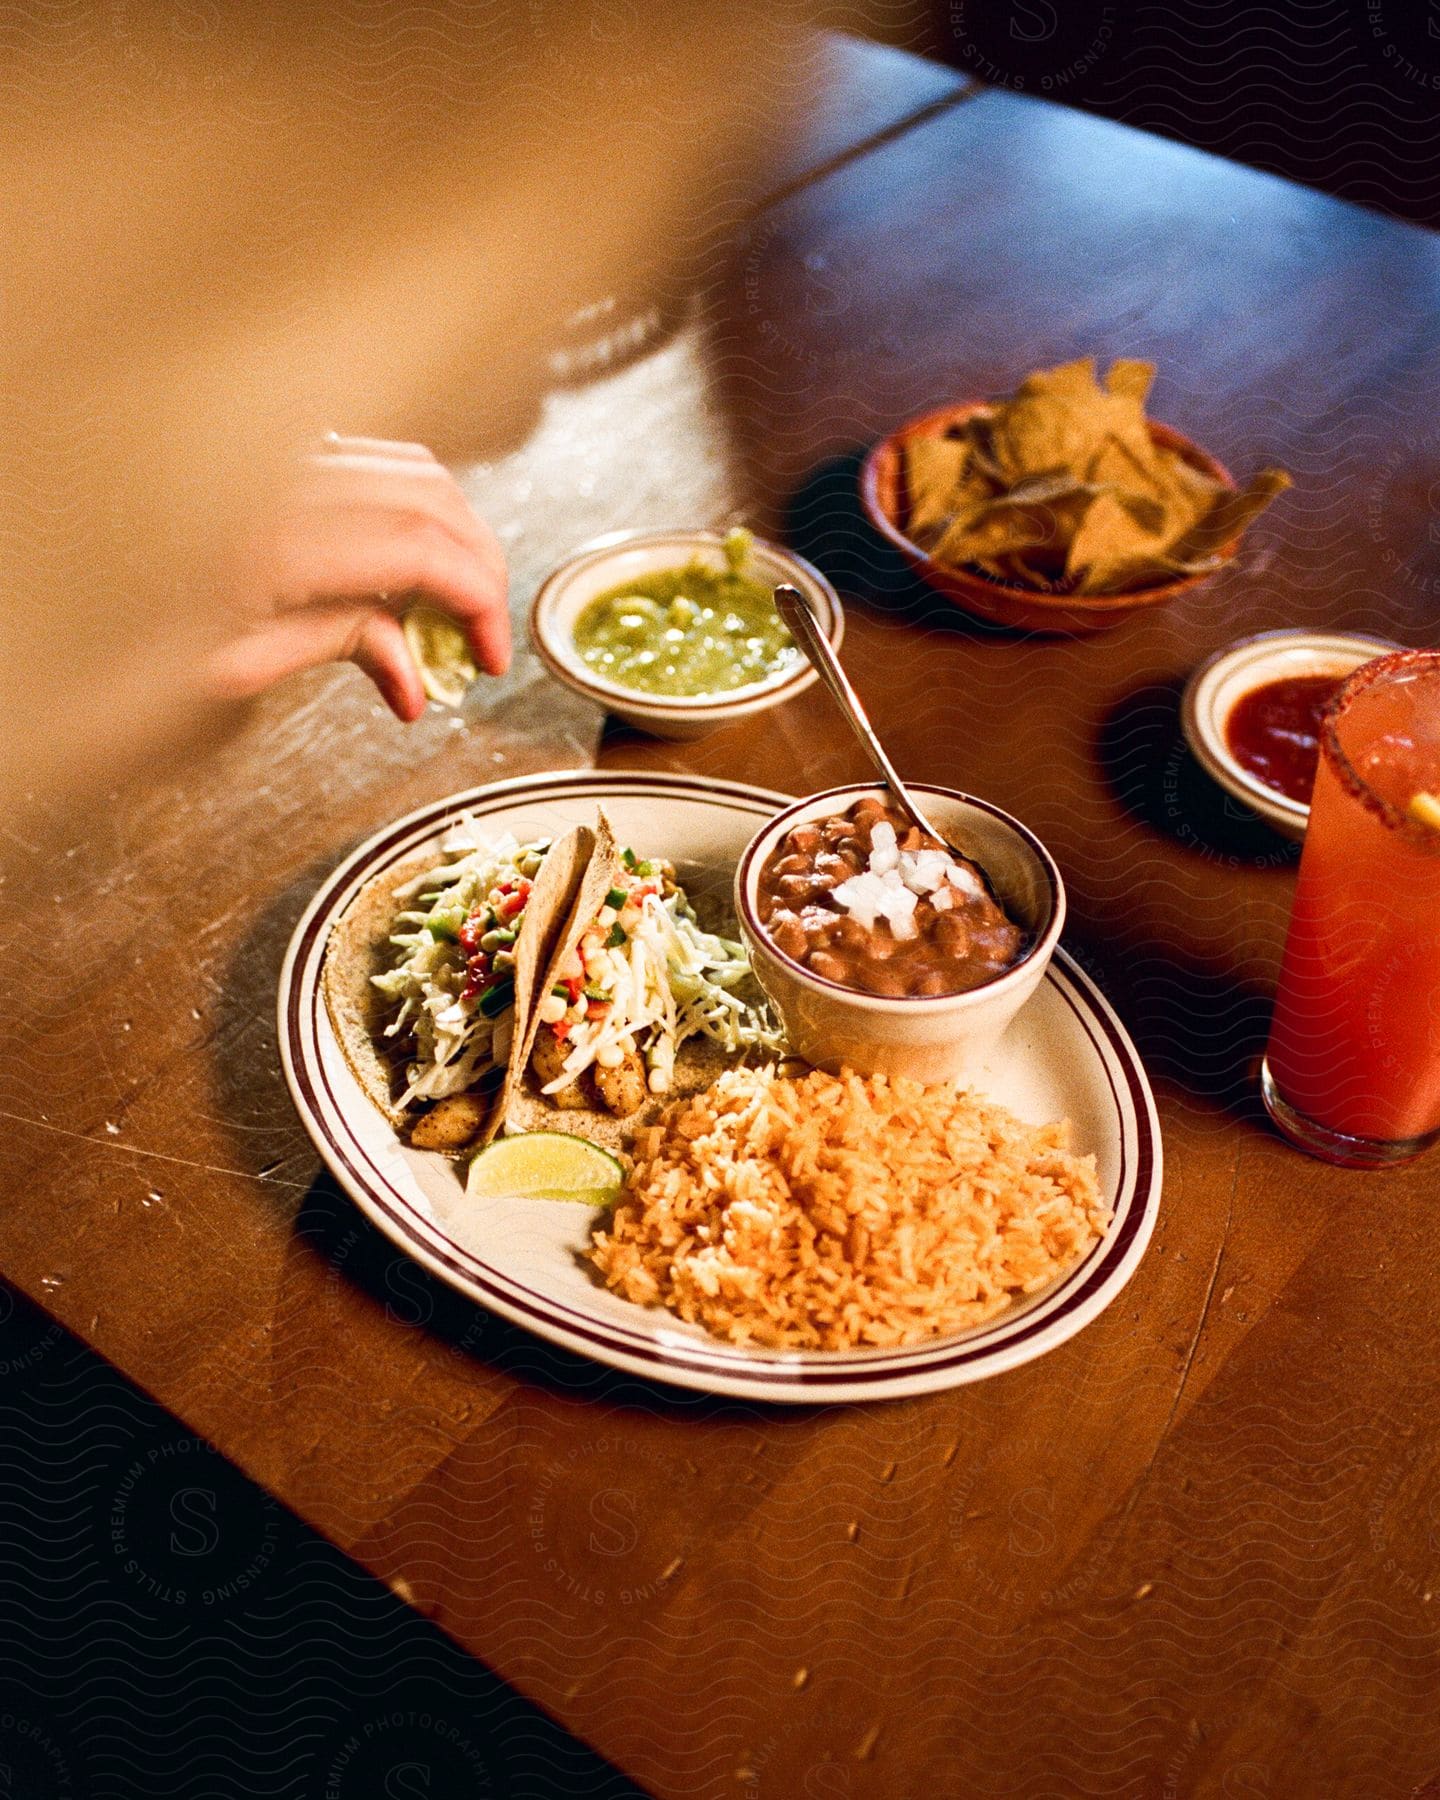 A woman's hand reaches over a table with plates of Mexican food and an iced drink